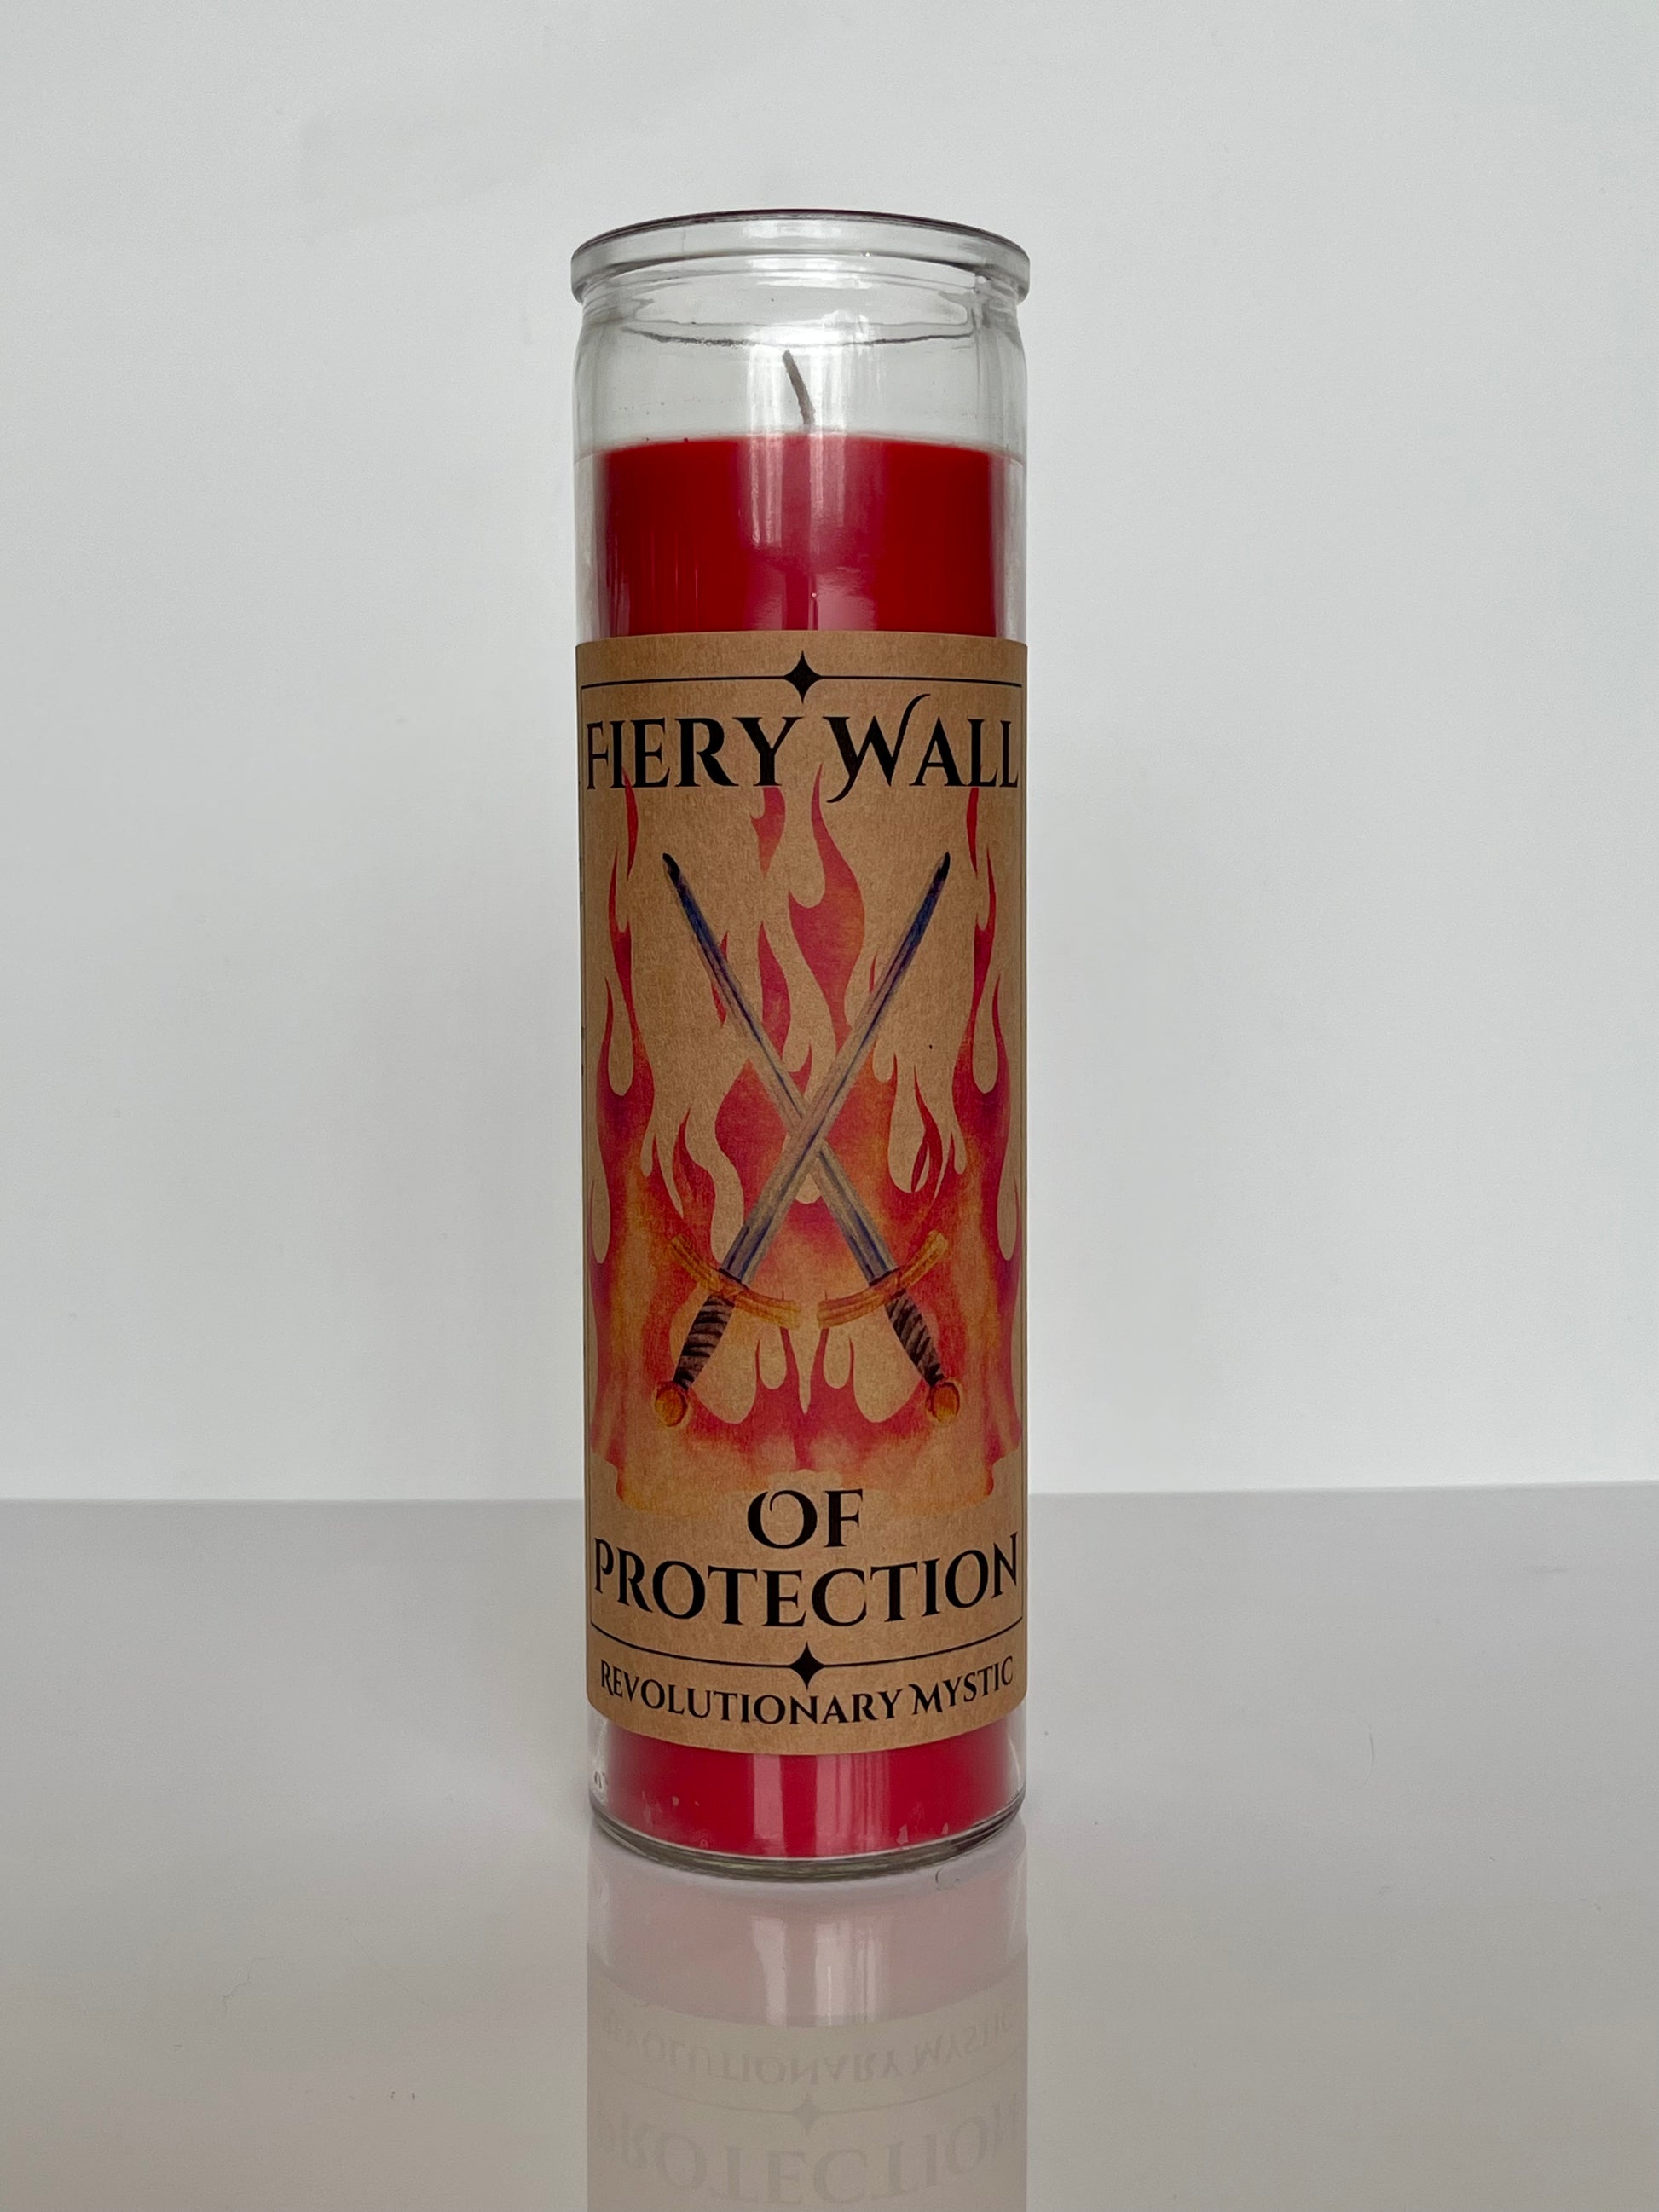 Fiery Wall of Protection Candle - Revolutionary Mystic